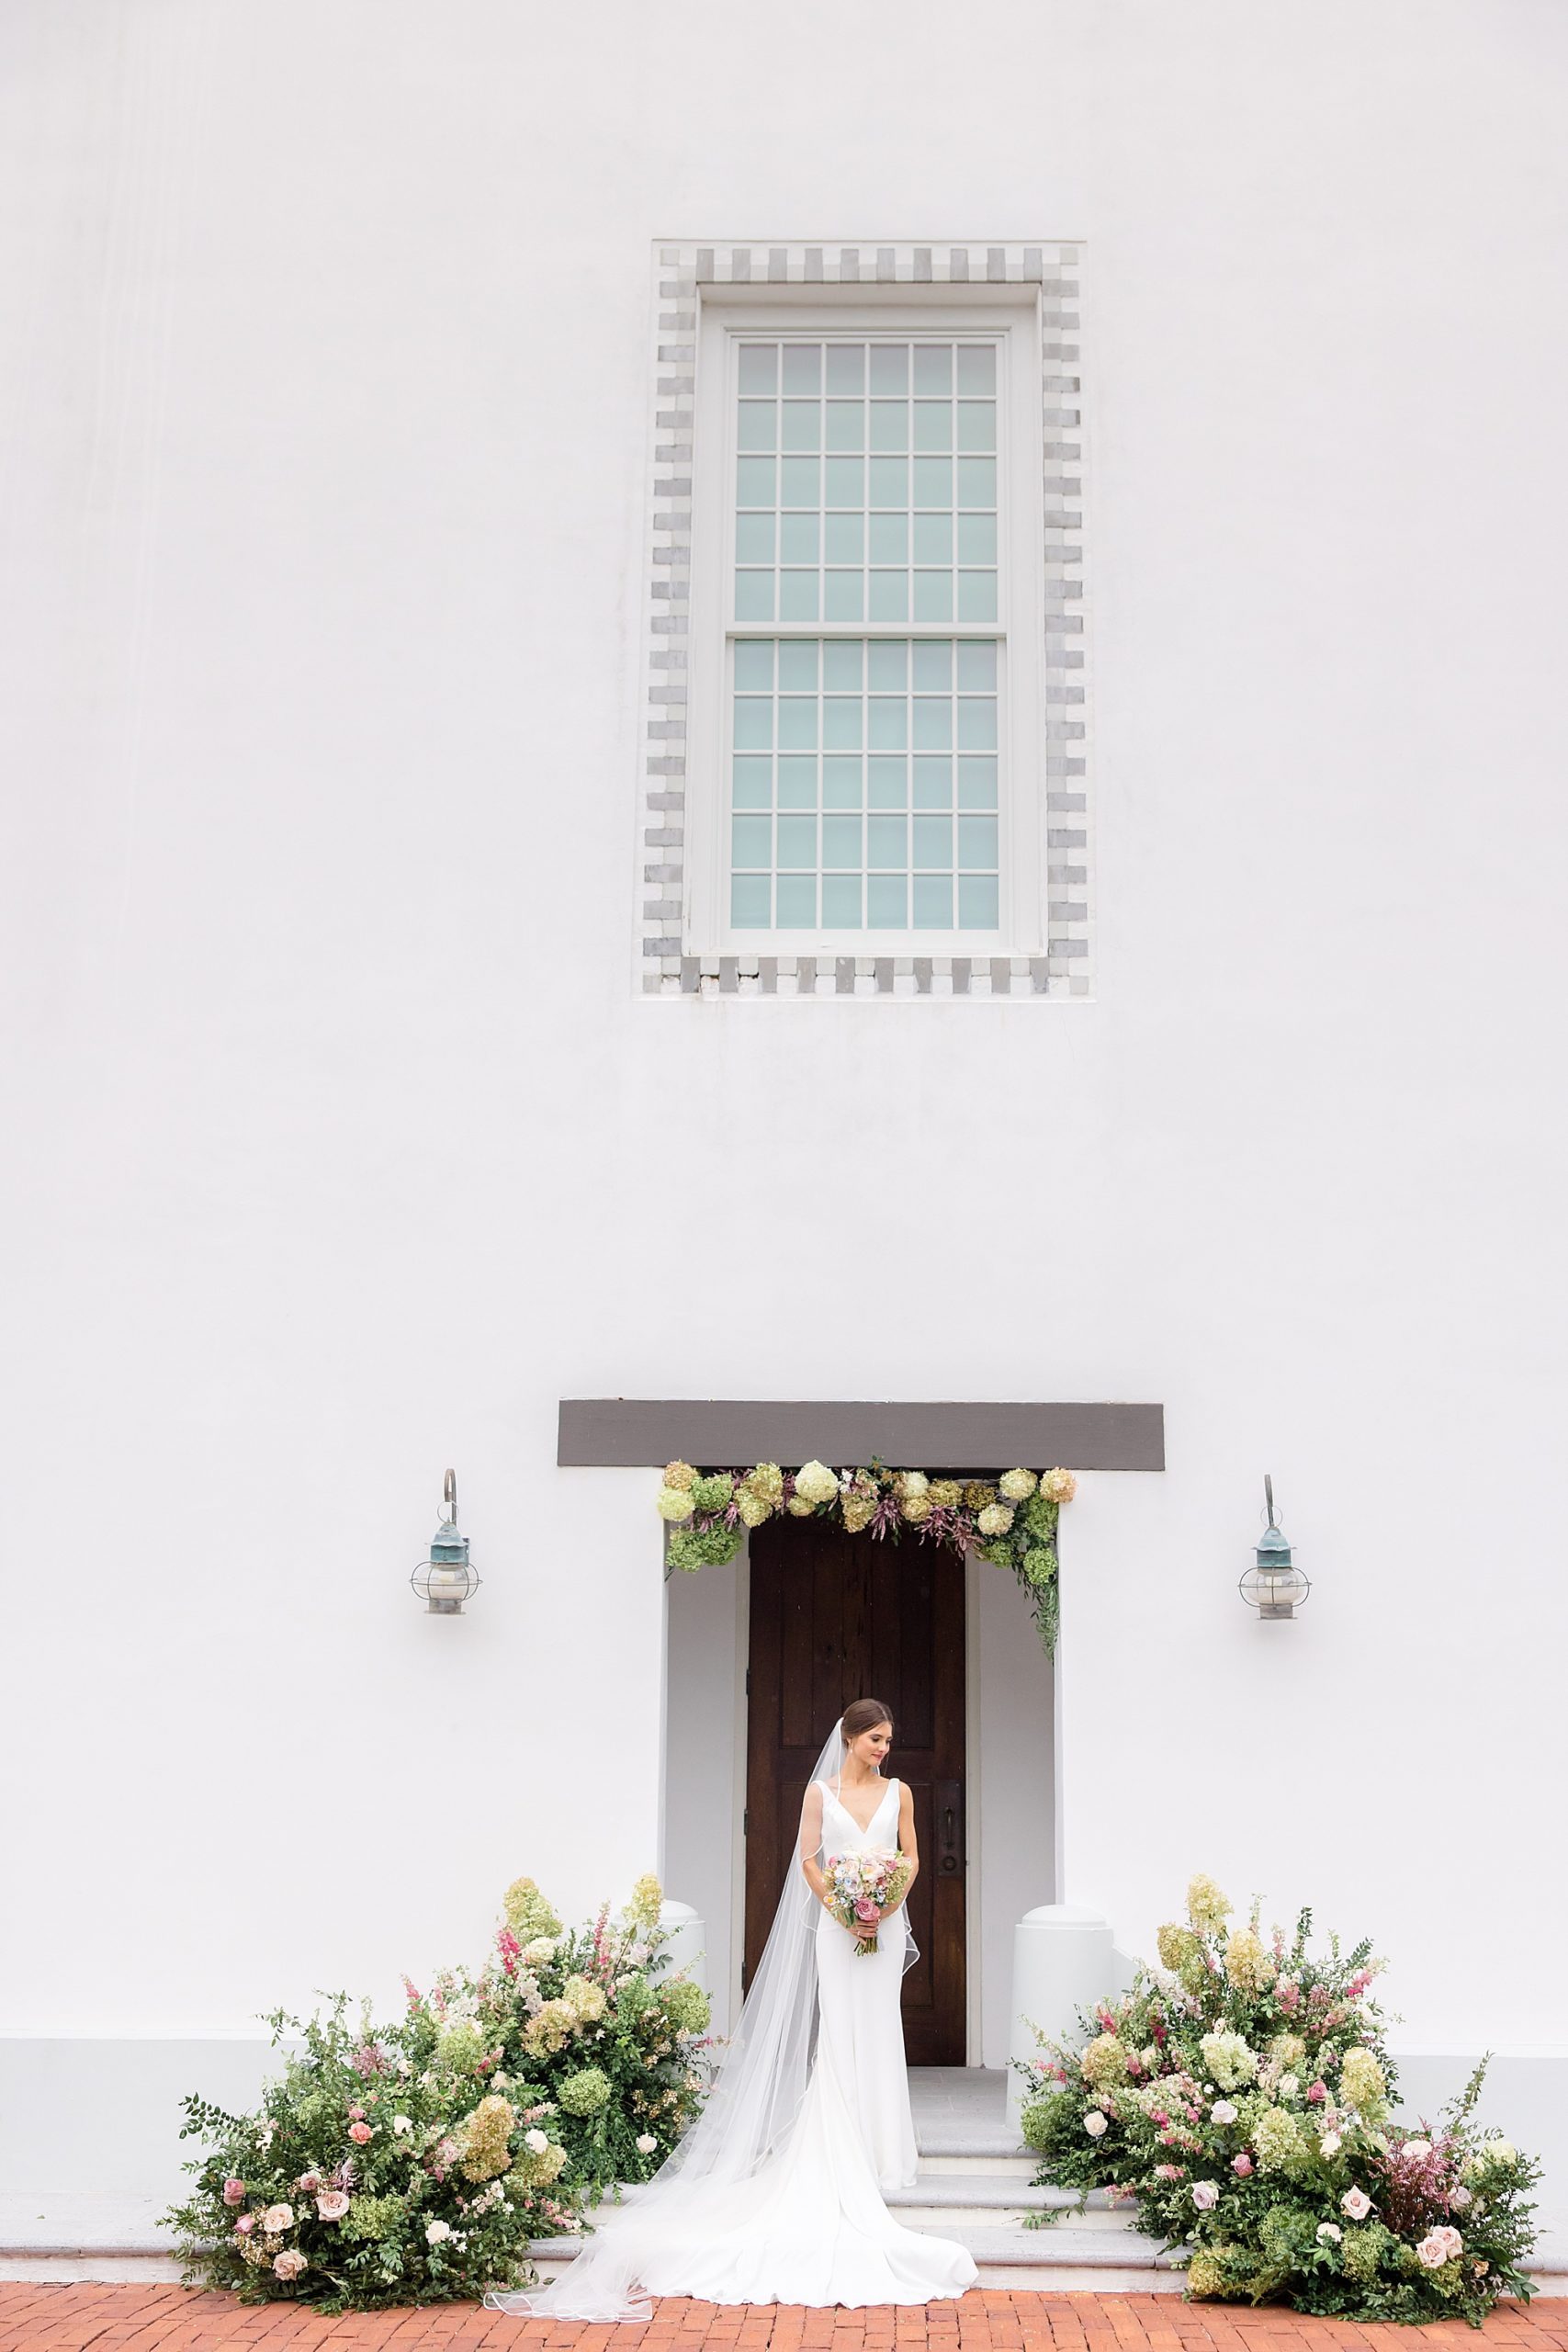 Rosemary Beach Town Hall bridal portrait in Florida